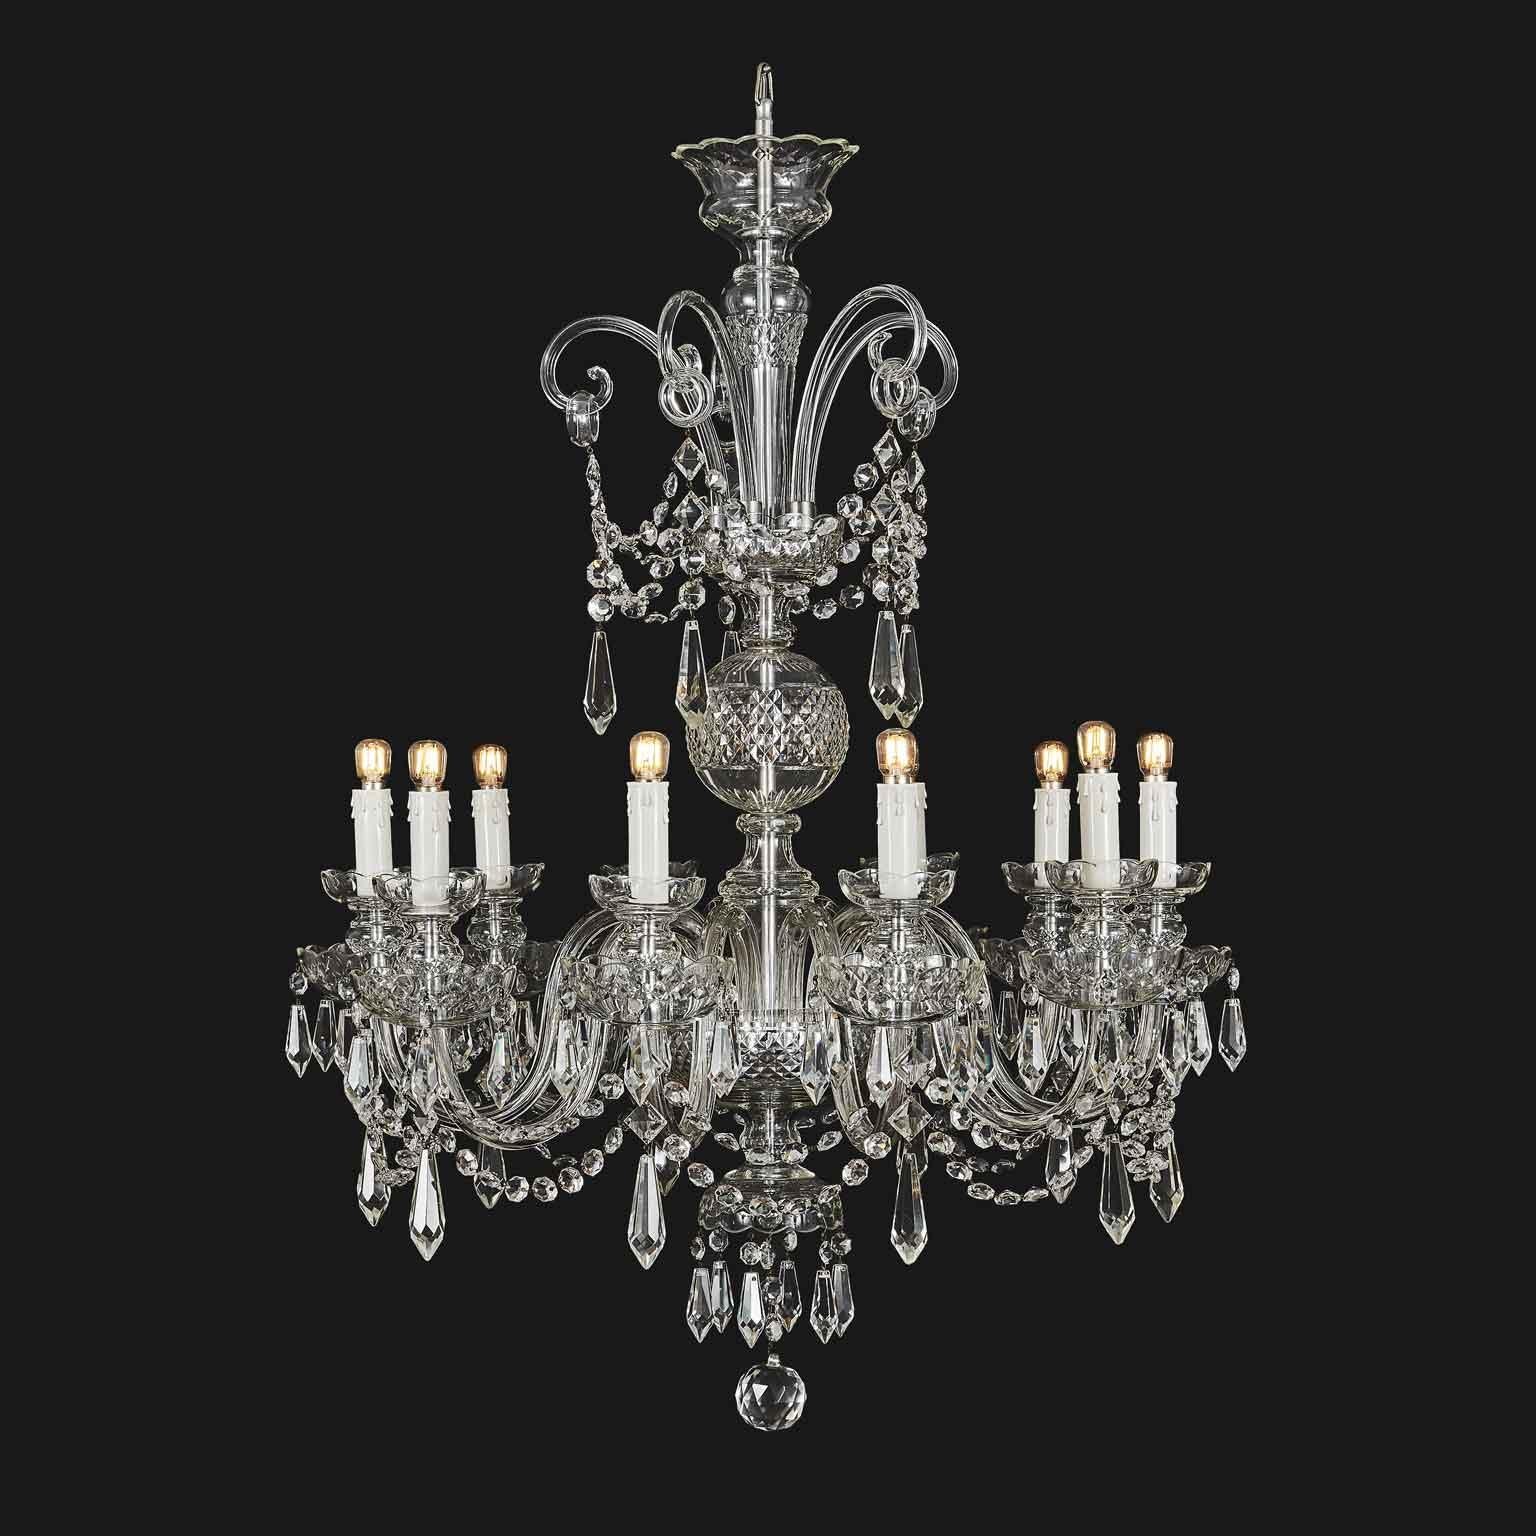 Italian ten-light chandelier realized with Bohemian crystal around 1950s. This is a classical crystal Georgian style chandelier decorated with crystal chains and drops. In good condition and working for European standard, this Italian chandelier is